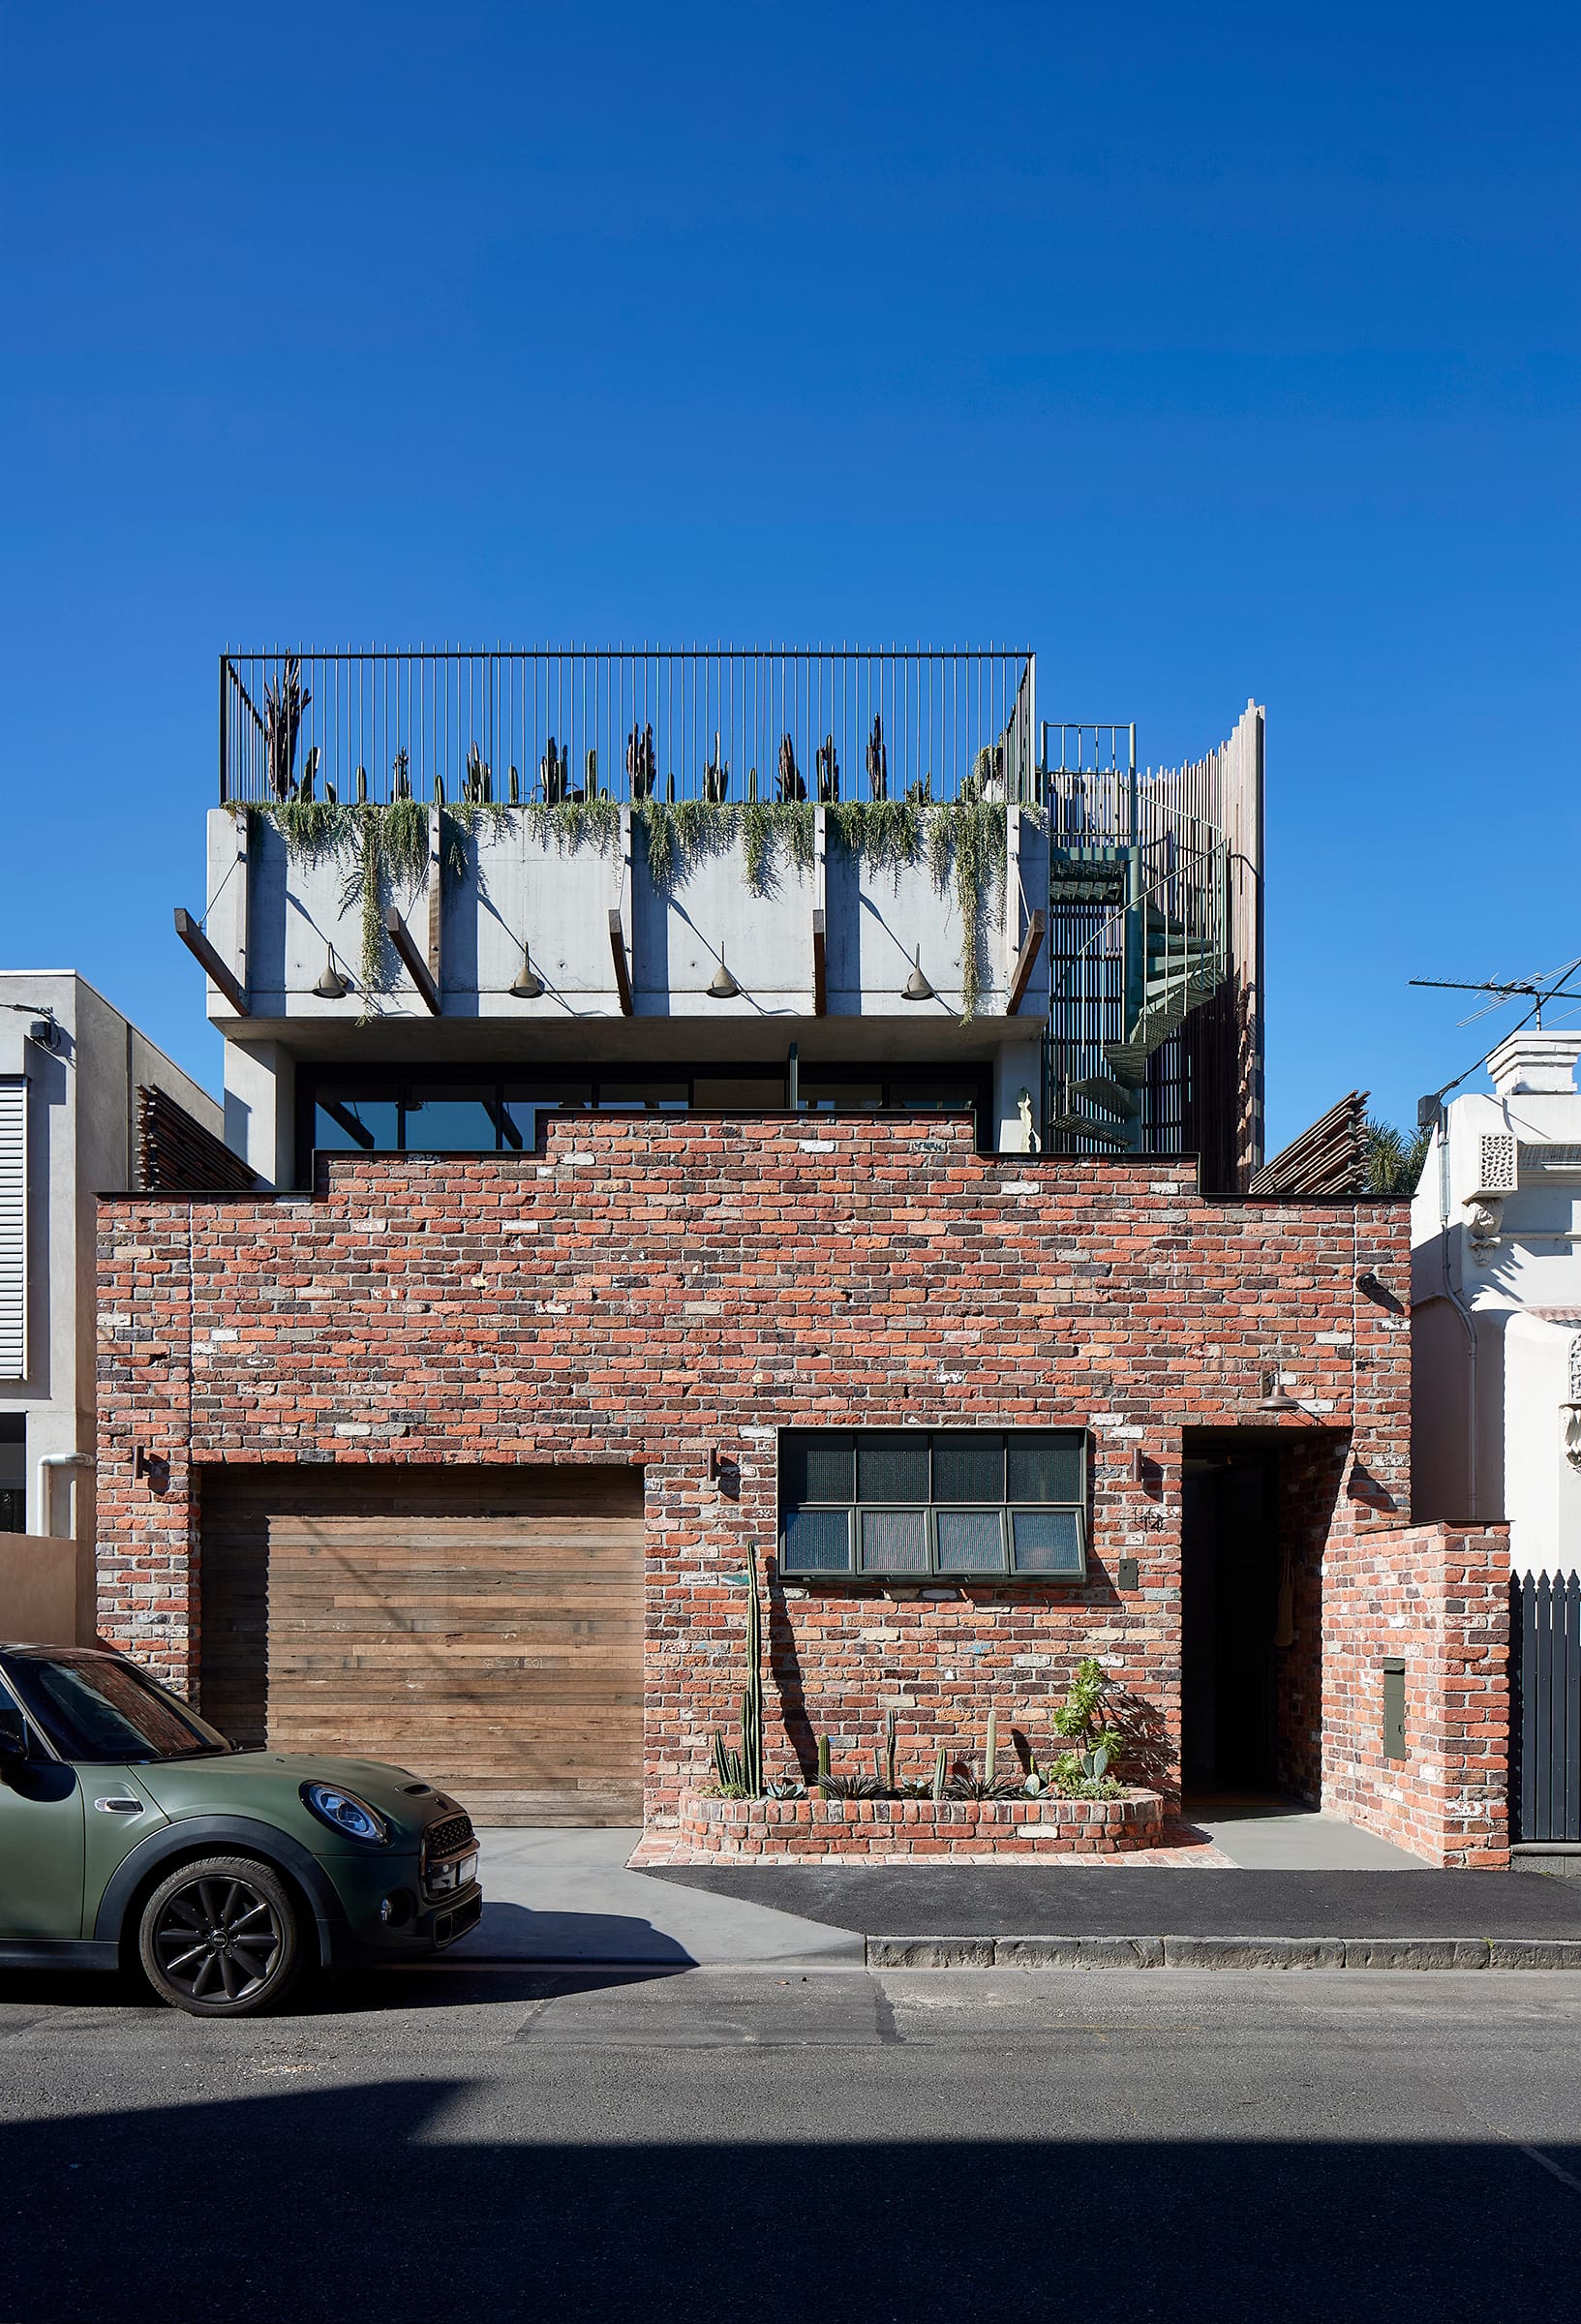 Fabrica by mcmahon and nerlich. Photography by Shannon McGrath. Showing the front facade